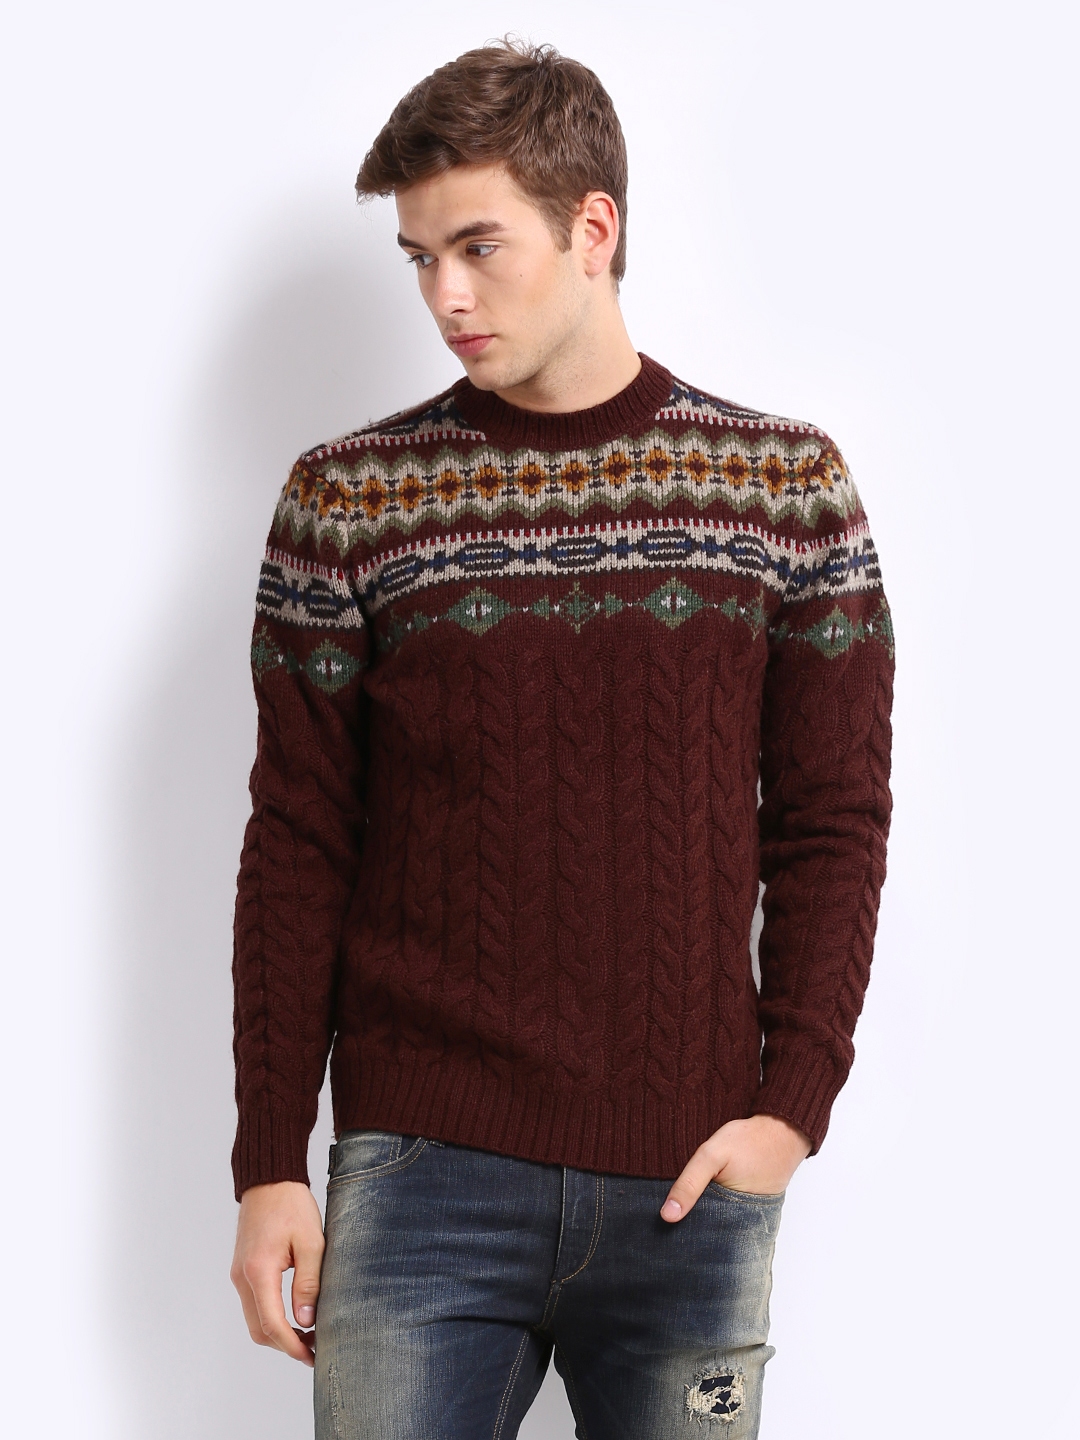 Buy Levis Men Brown Cable Knit Sweater - Sweaters for Men 223285 | Myntra